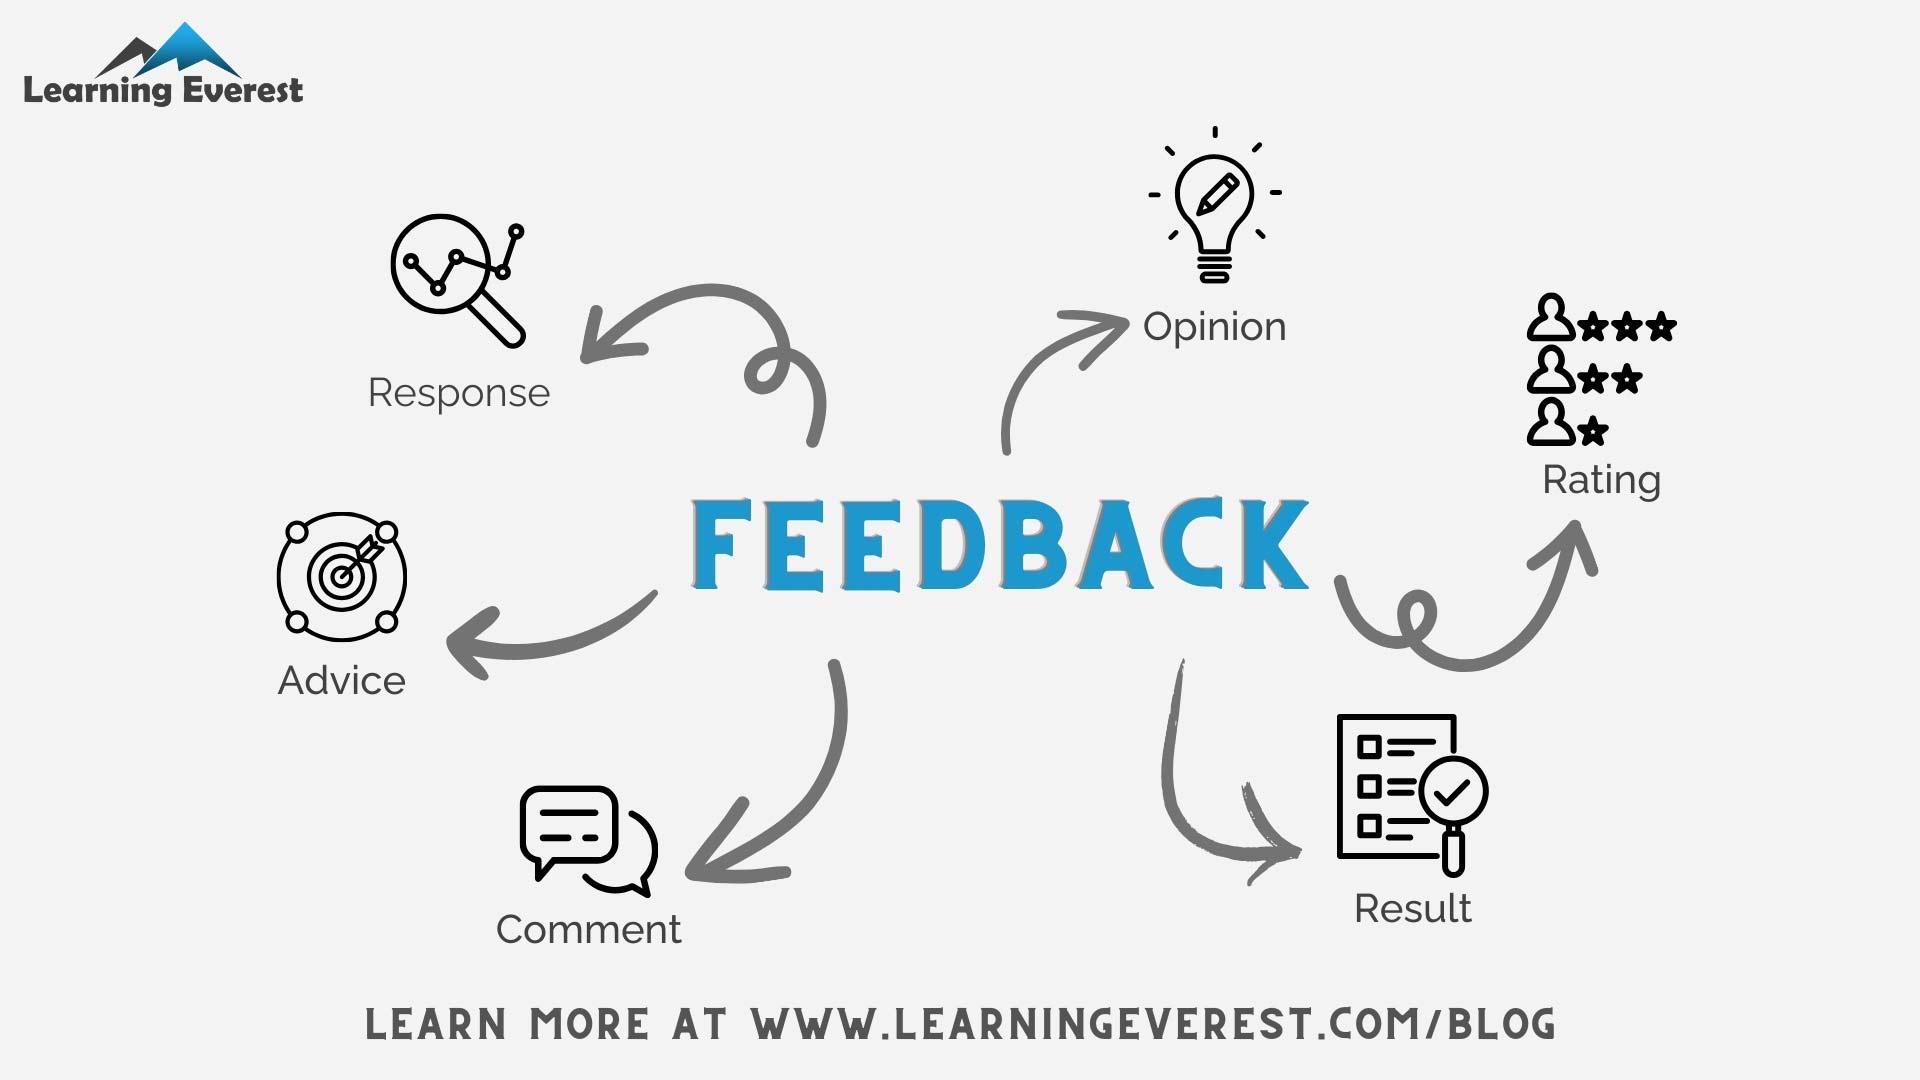 What is feedback and the role of feedback?